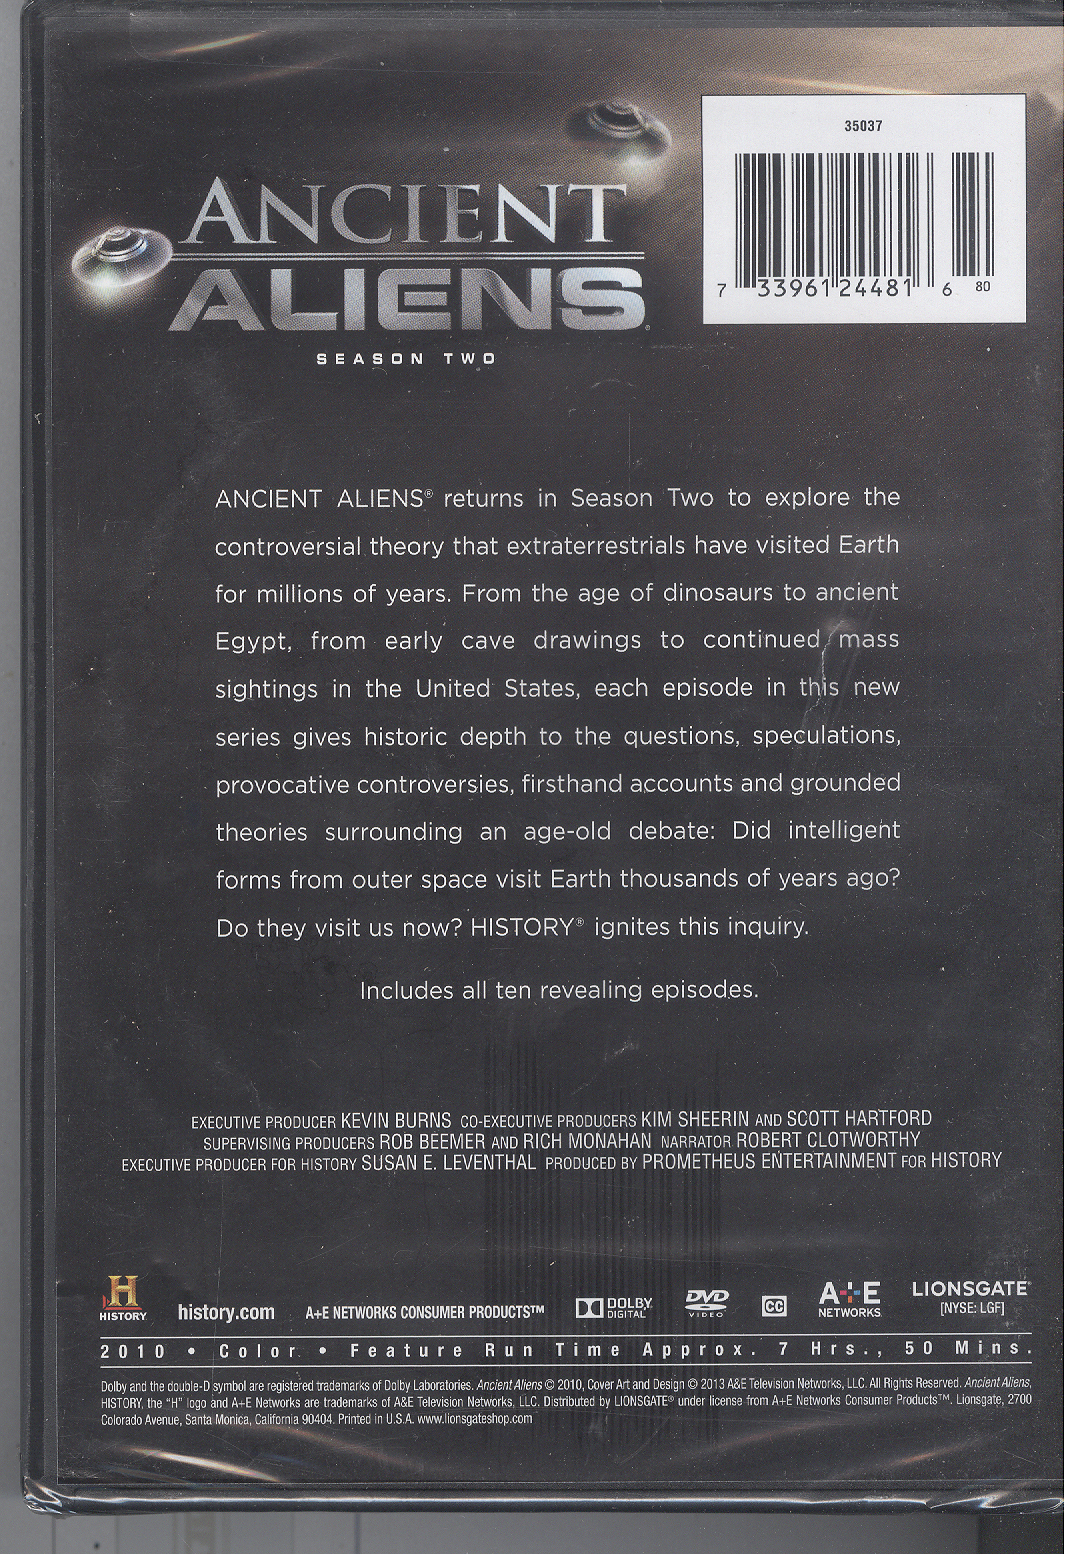 BRAND NEW SEALED - Ancient Aliens Season 2 (DVD, 3-Discs) History Channel